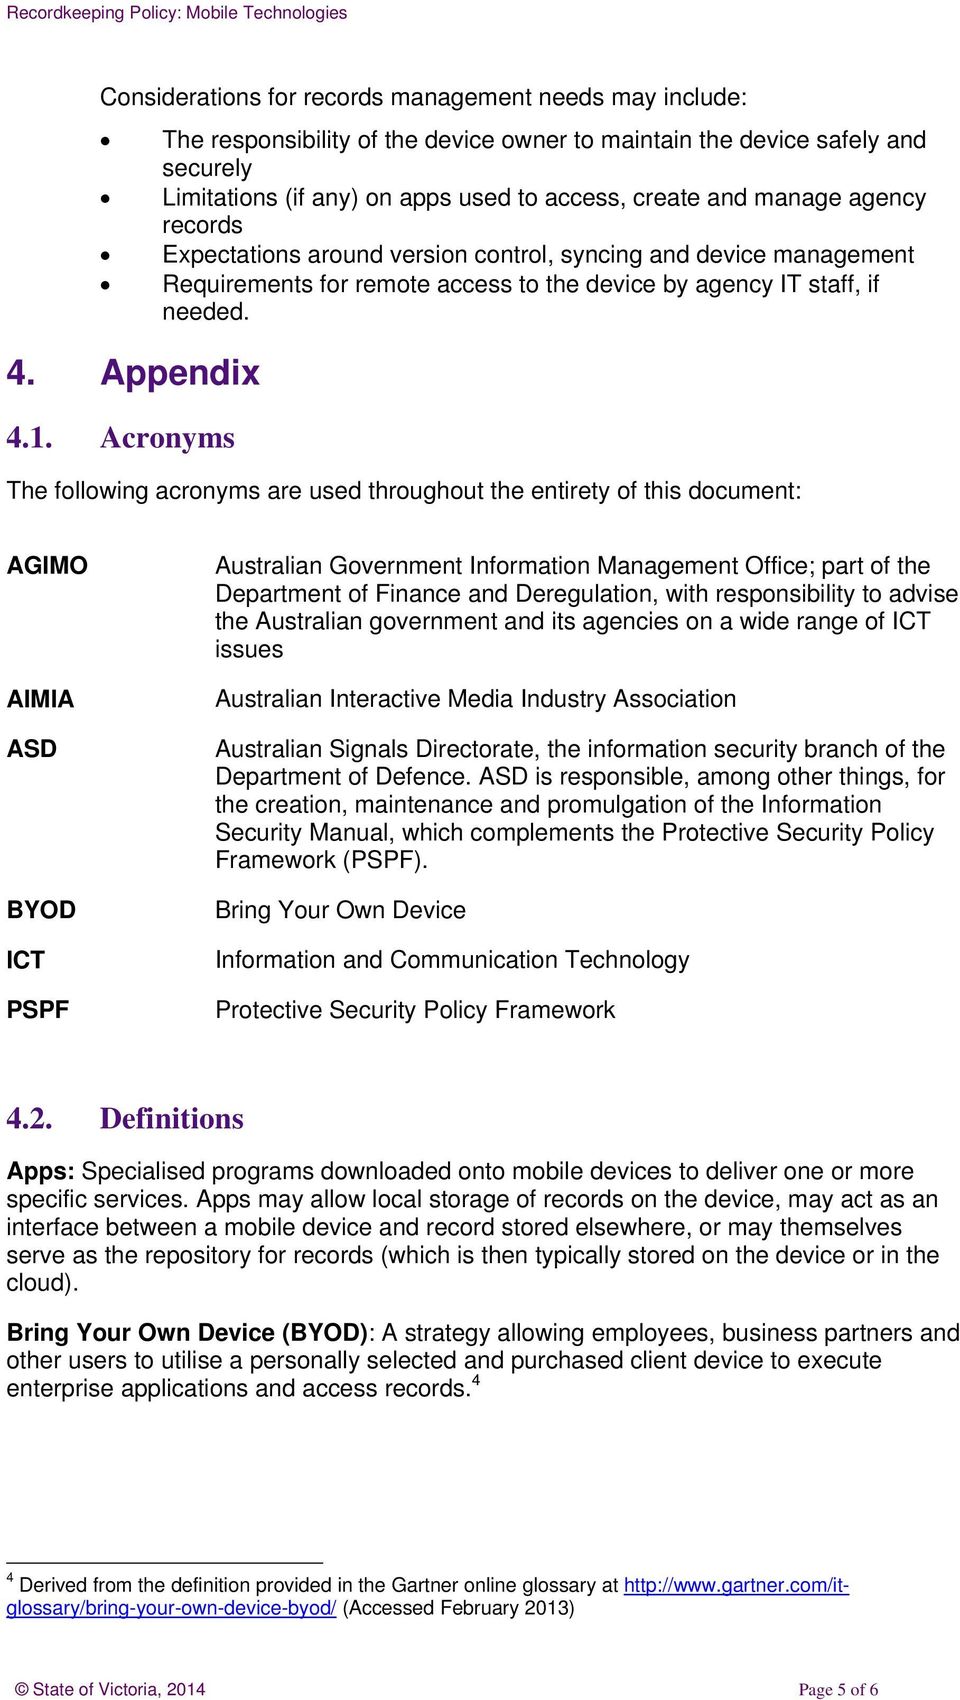 Acronyms The following acronyms are used throughout the entirety of this document: AGIMO AIMIA ASD BYOD ICT PSPF Australian Government Information Management Office; part of the Department of Finance